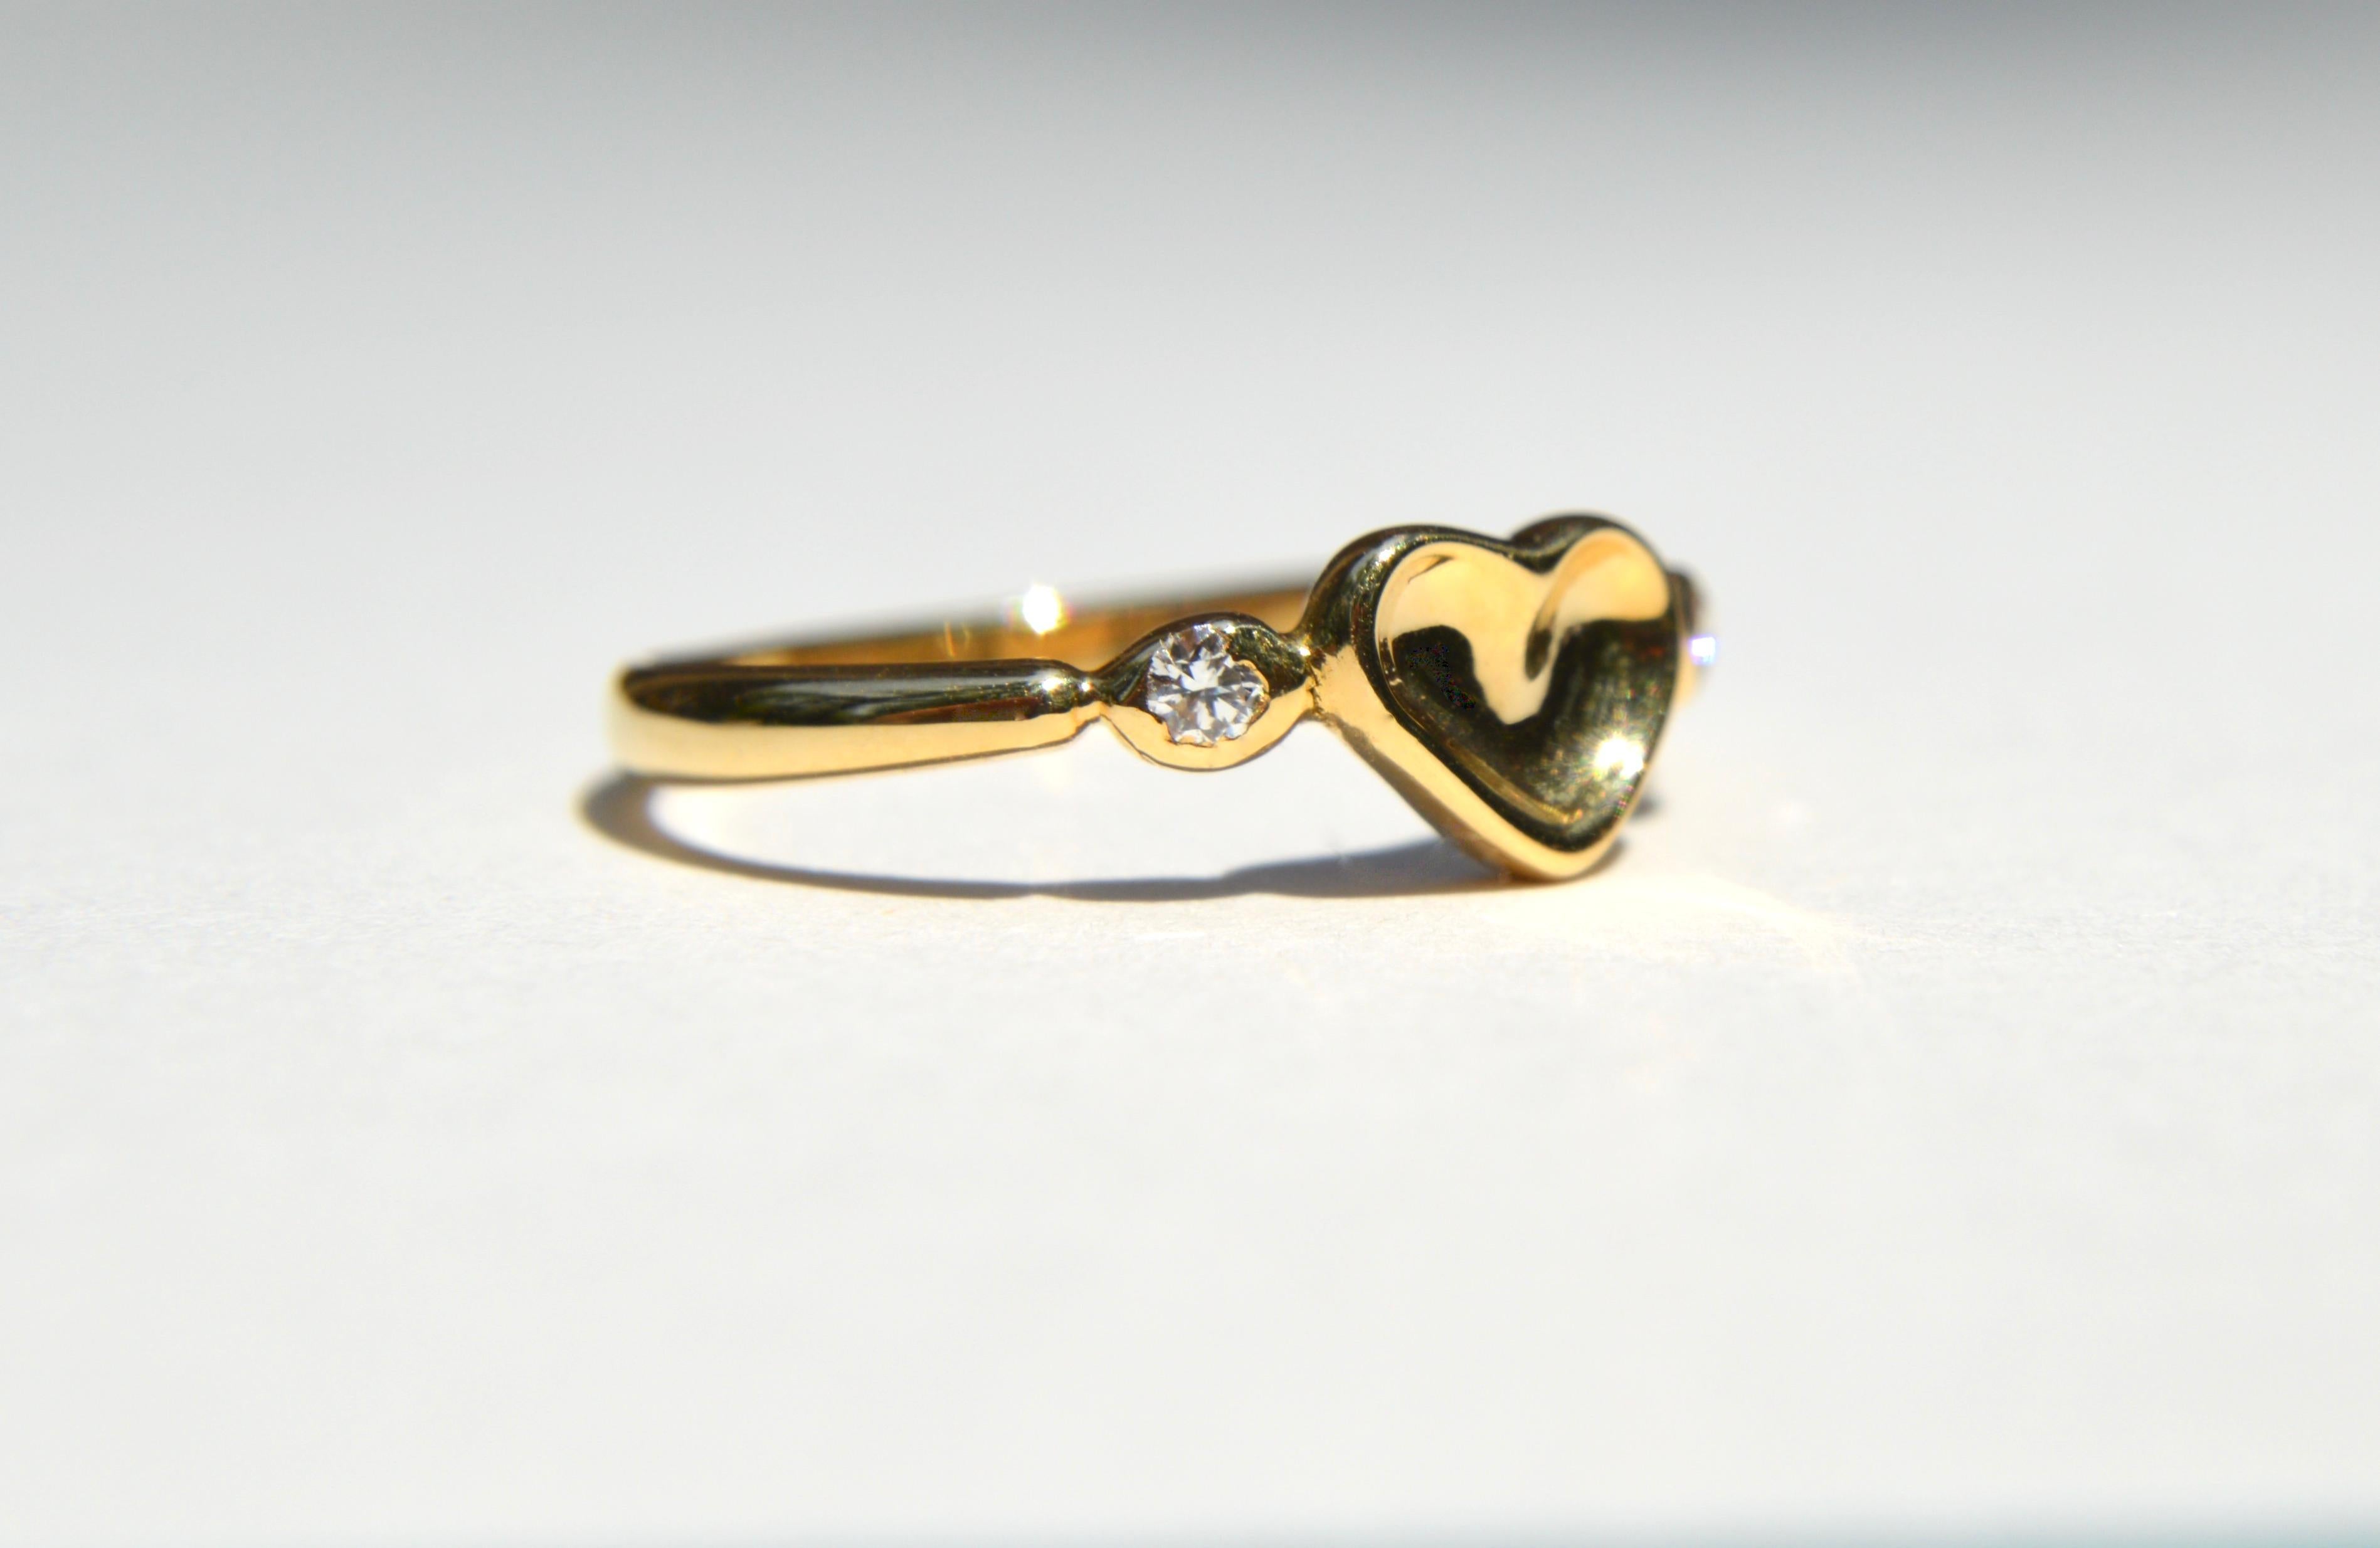 Beautiful vintage Elsa Peretti for Tiffany & Co. circa 1984 18K yellow gold heart ring with 2 diamonds. Size 5, can be resized by a jeweler. In excellent condition. Each sparkling clarity VS1 (very slightly included), color F (near colorless) round